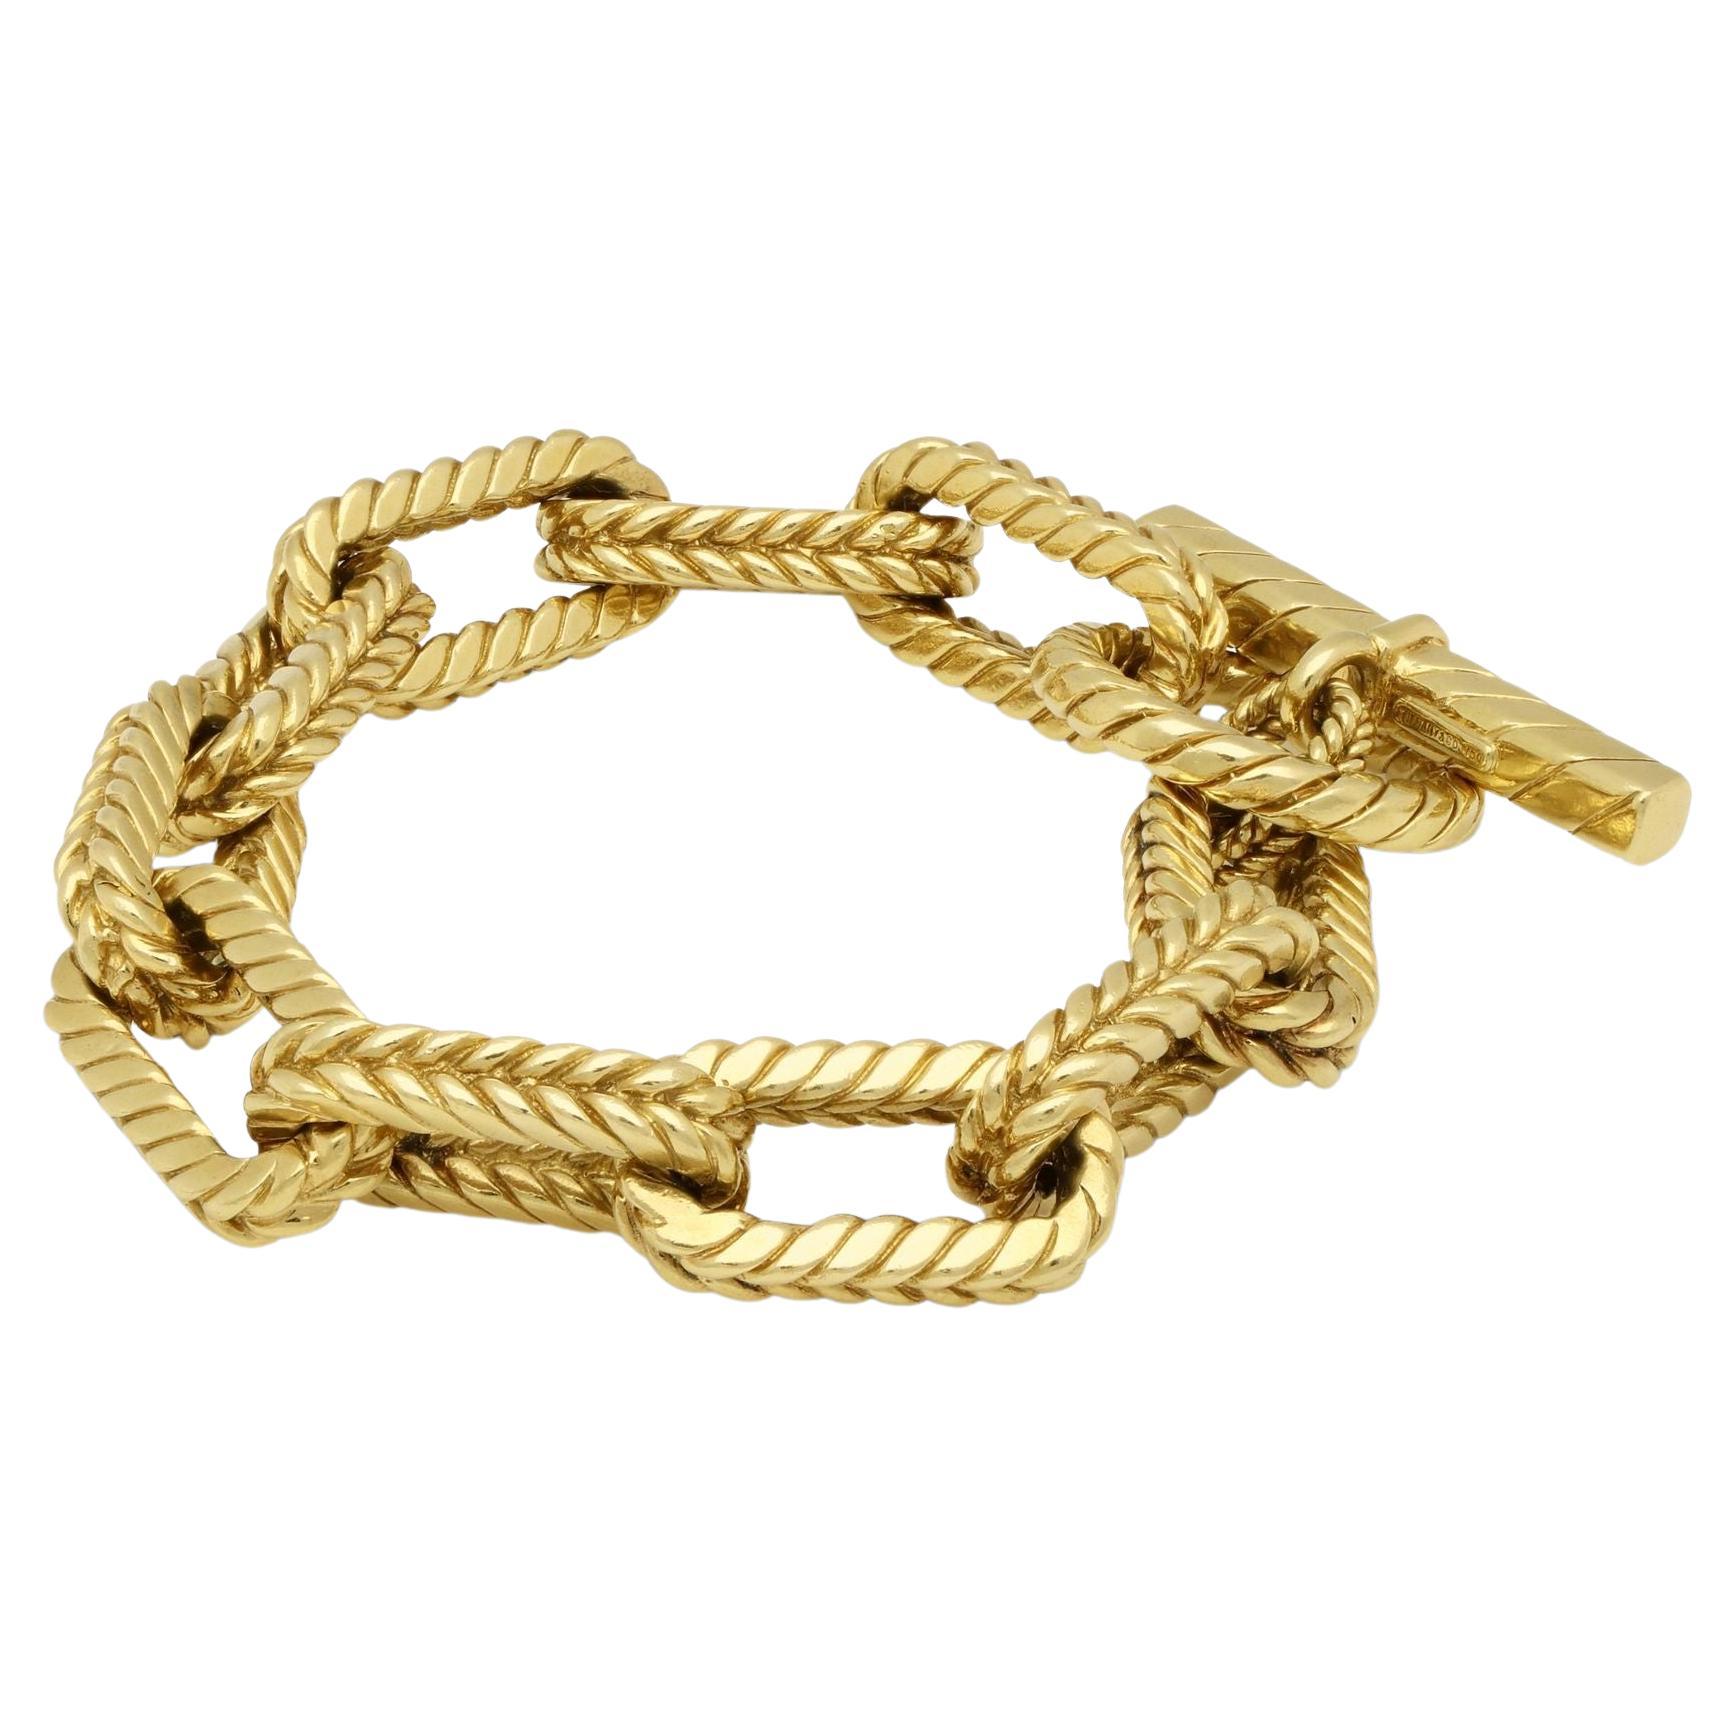 Tiffany Vintage 18ct Gold Chain Link Bracelet With Rope-Like Texture Circa 1980s For Sale